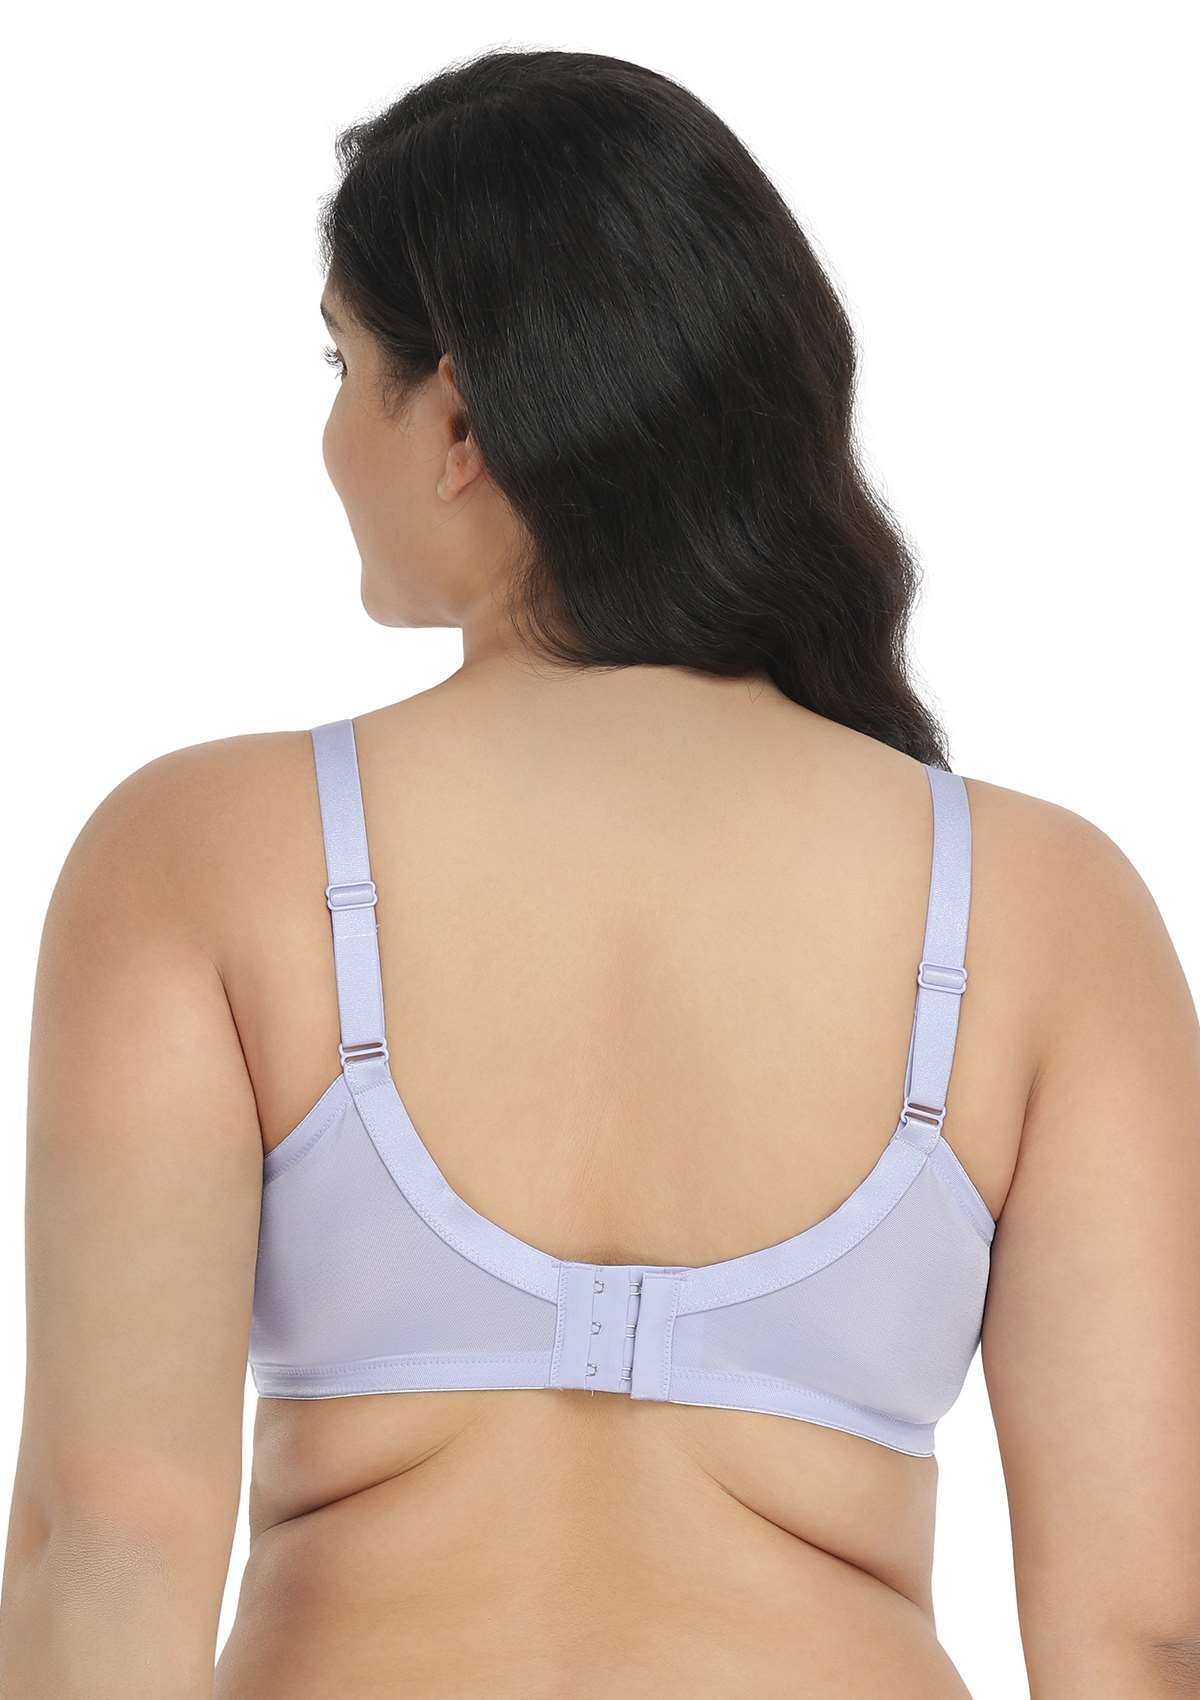 HSIA Wisteria Bra For Lift And Support - Full Coverage Minimizer Bra - Crystal Blue / 40 / DDD/F